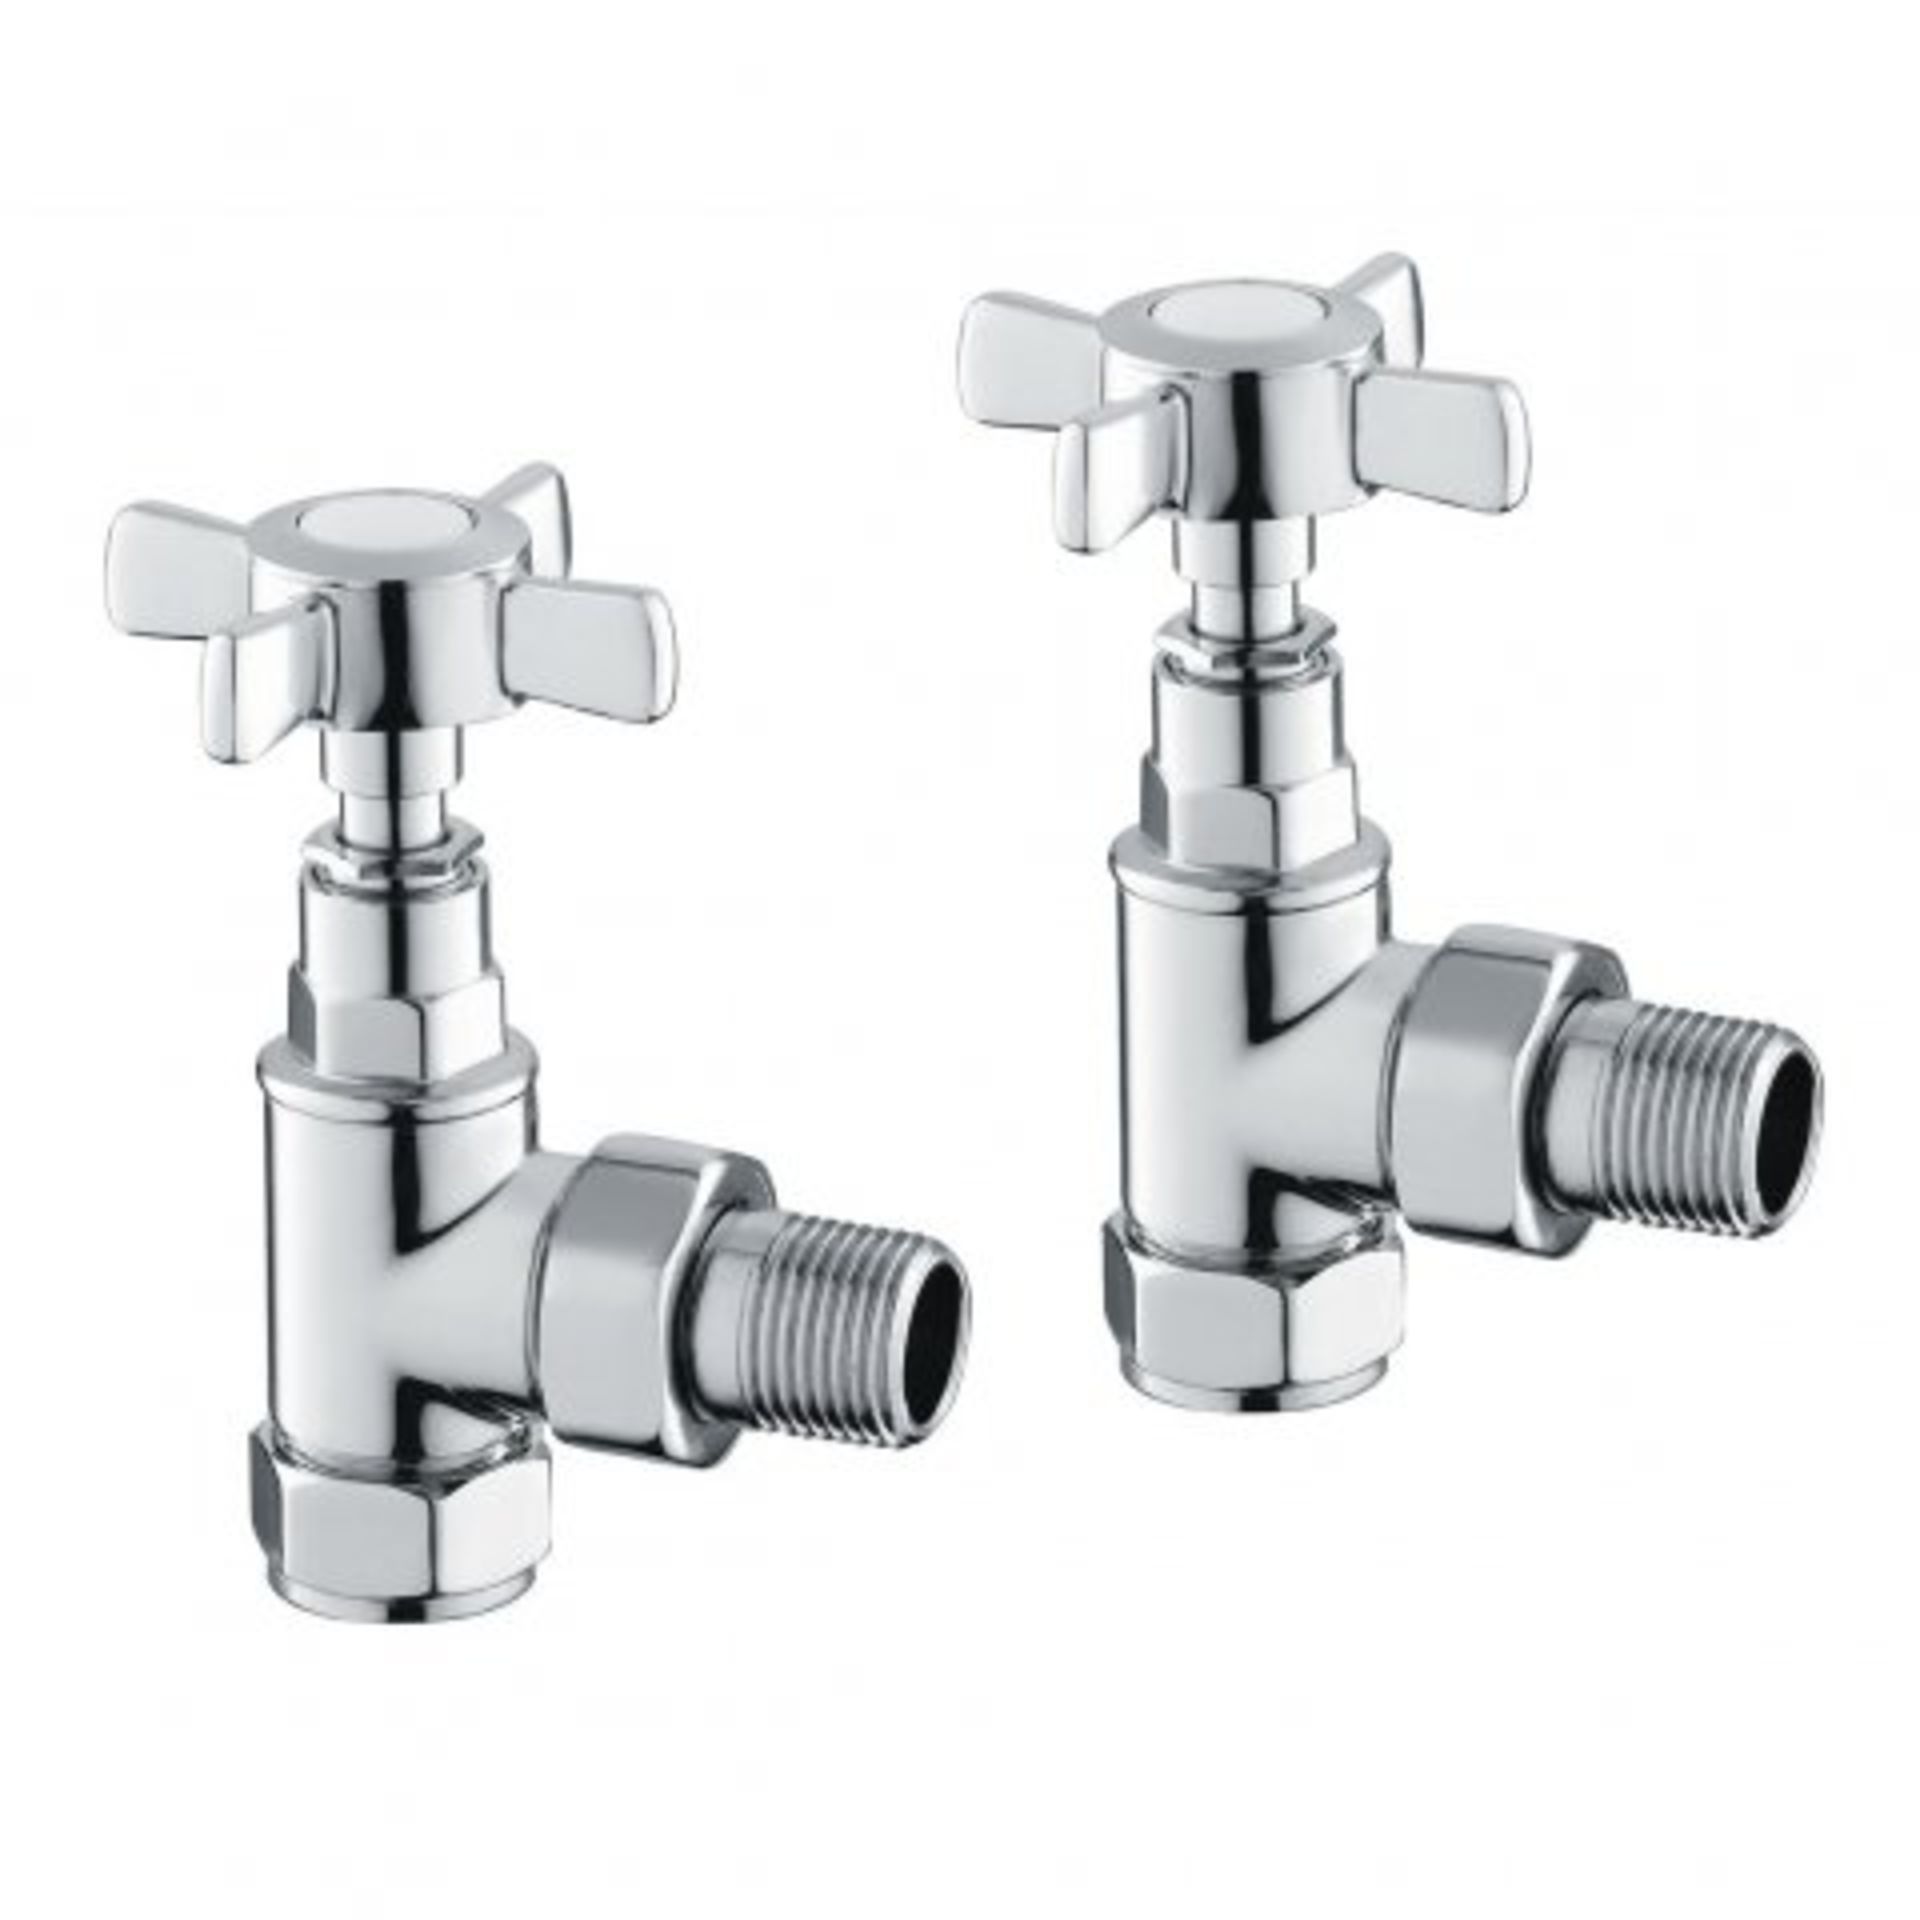 (P74) 15mm Standard Connection Angled Polished Chrome Radiator Valves Made of solid brass, our